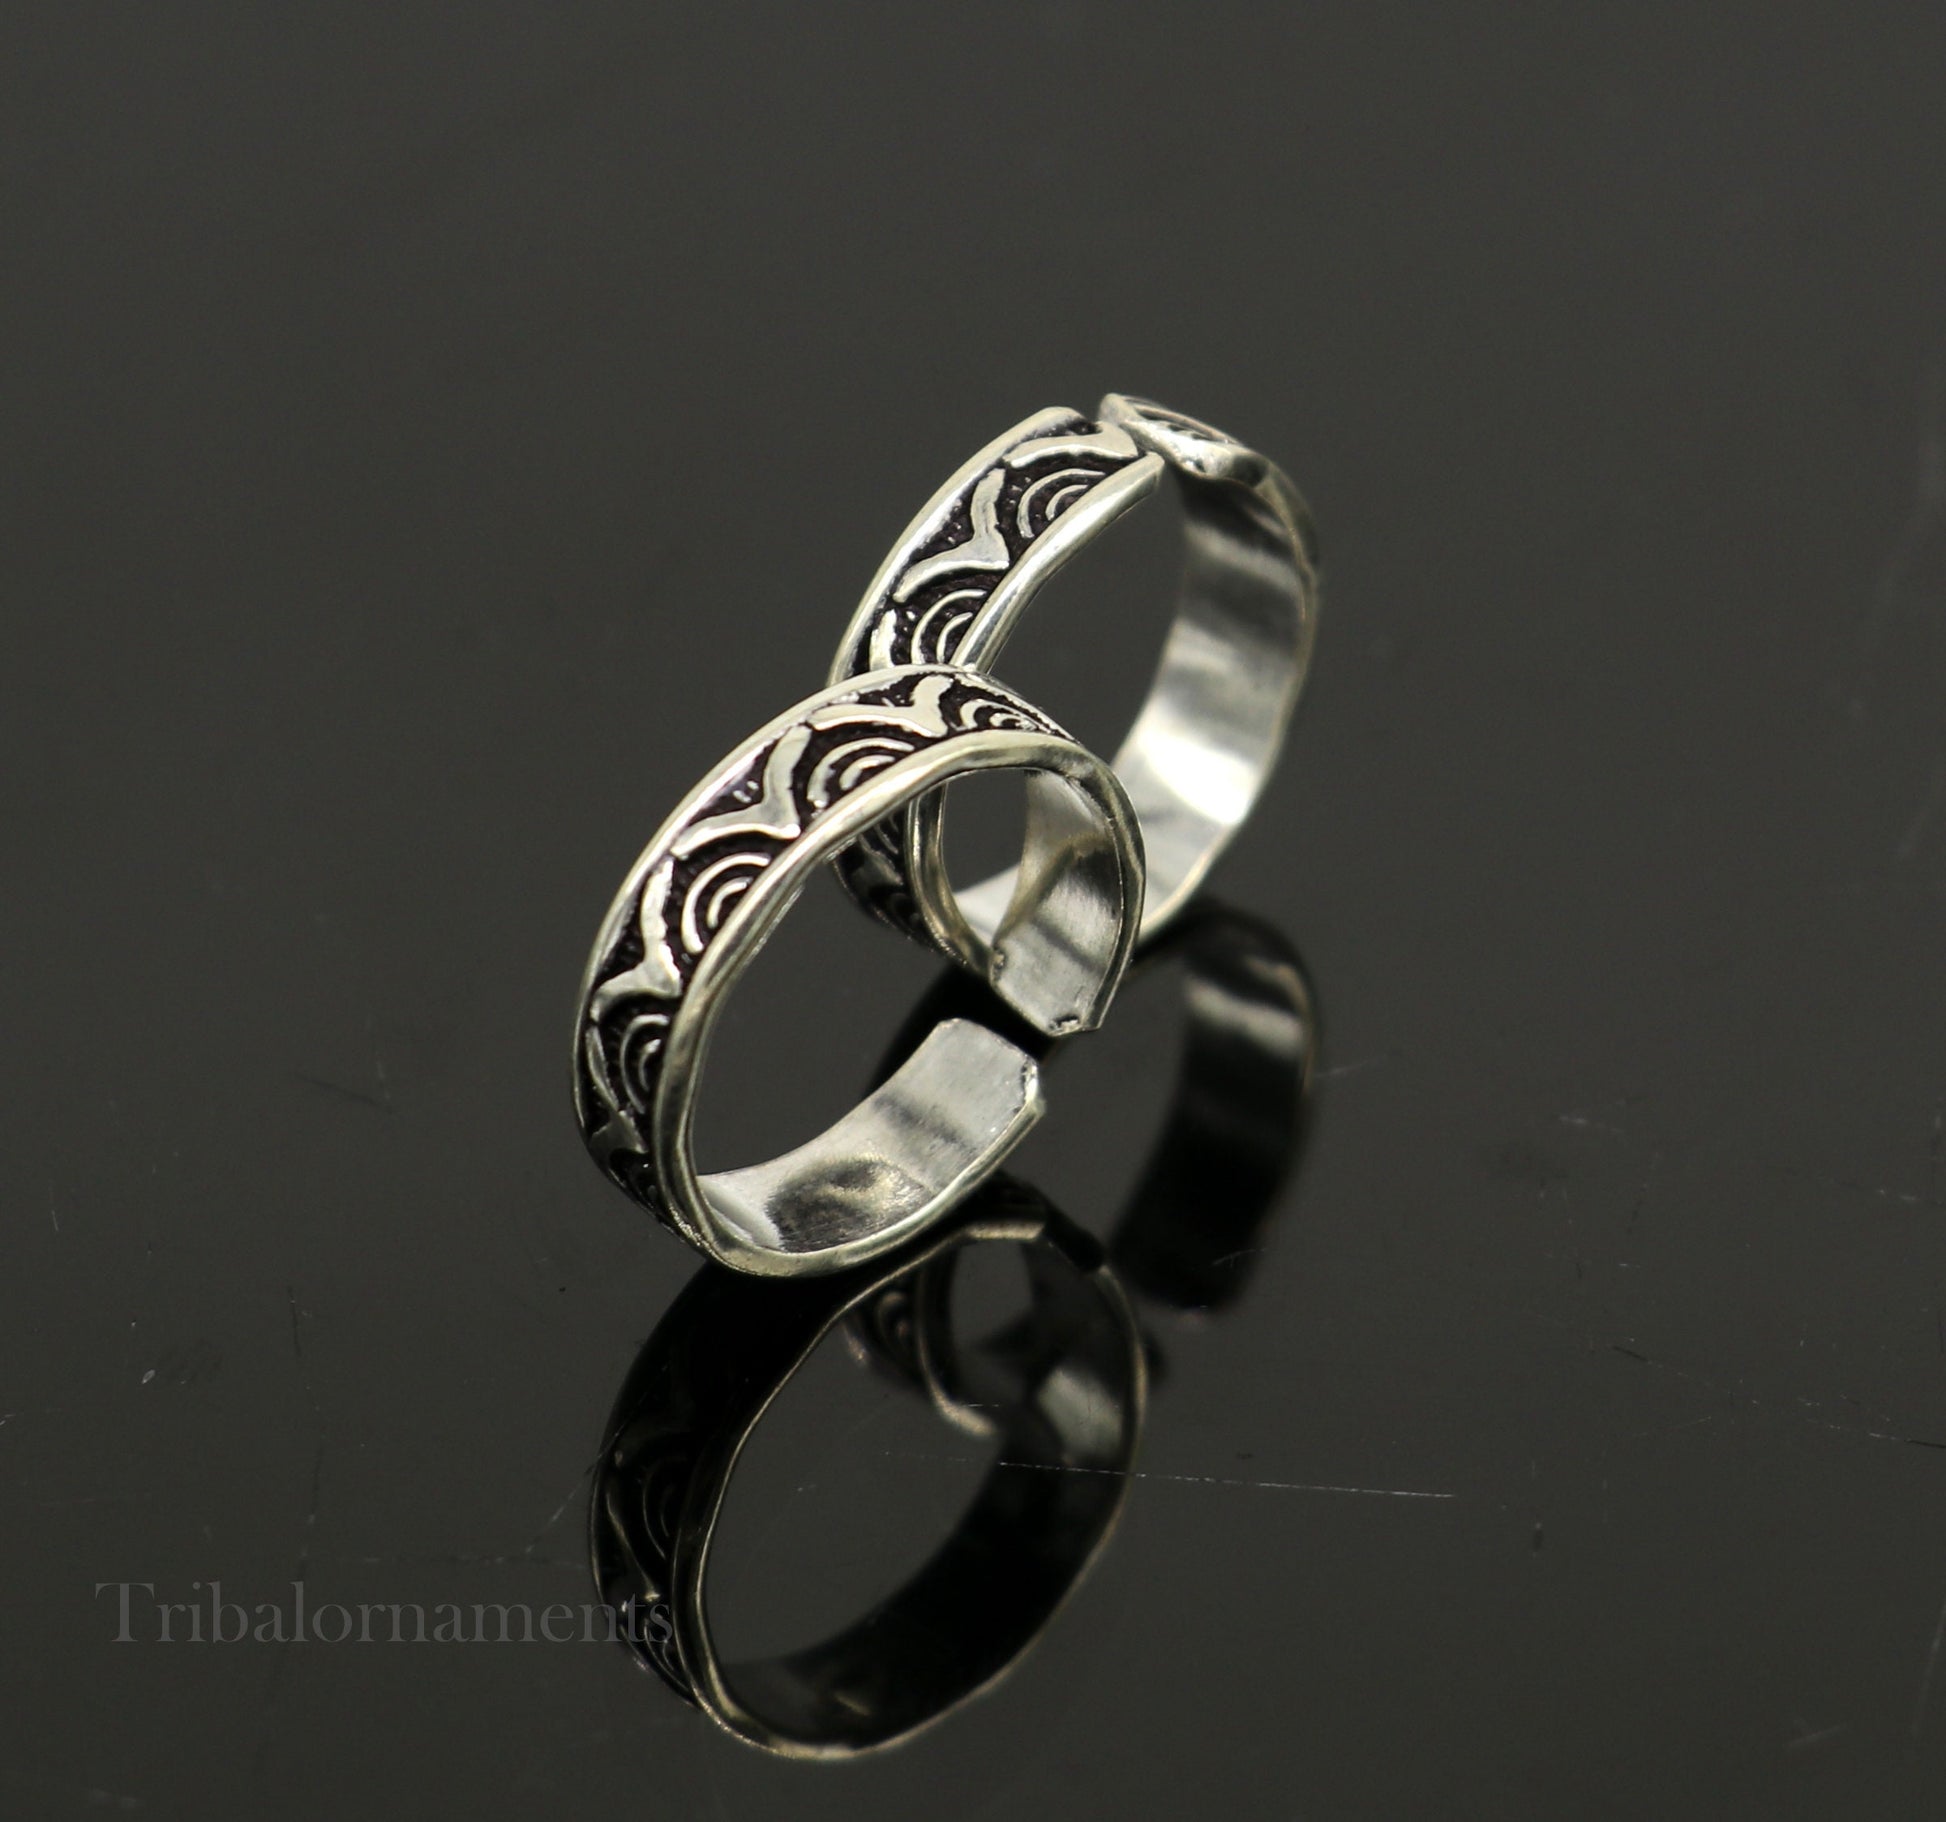 Solid Adjustable Toe ring 92.5 sterling silver handmade stunning toe ring, toe band stylish modern women's brides jewelry from india toer109 - TRIBAL ORNAMENTS